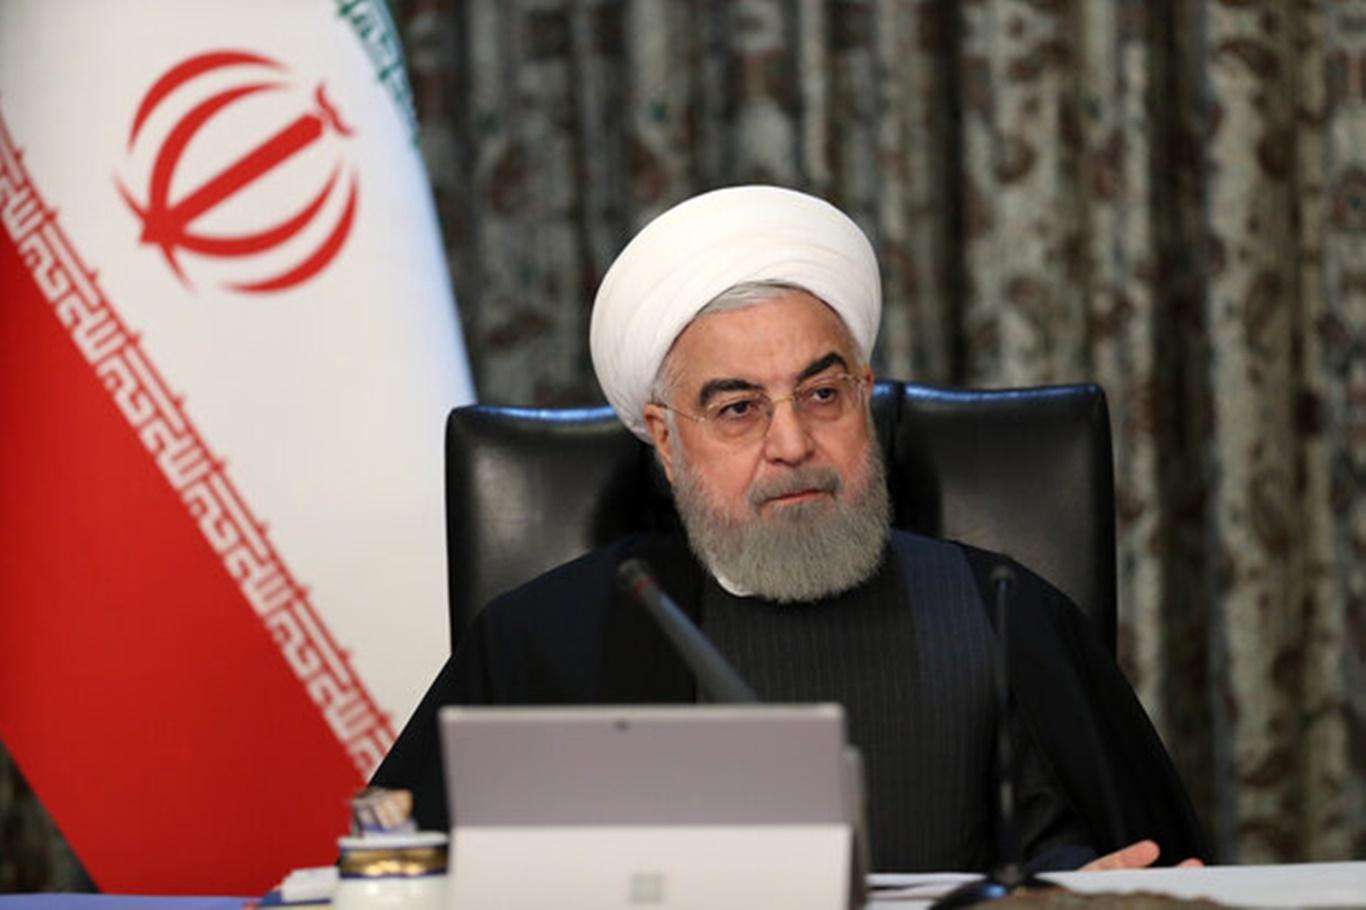 Rouhani: The lifting of arms embargo is a victory of the logic of right, law, rationality